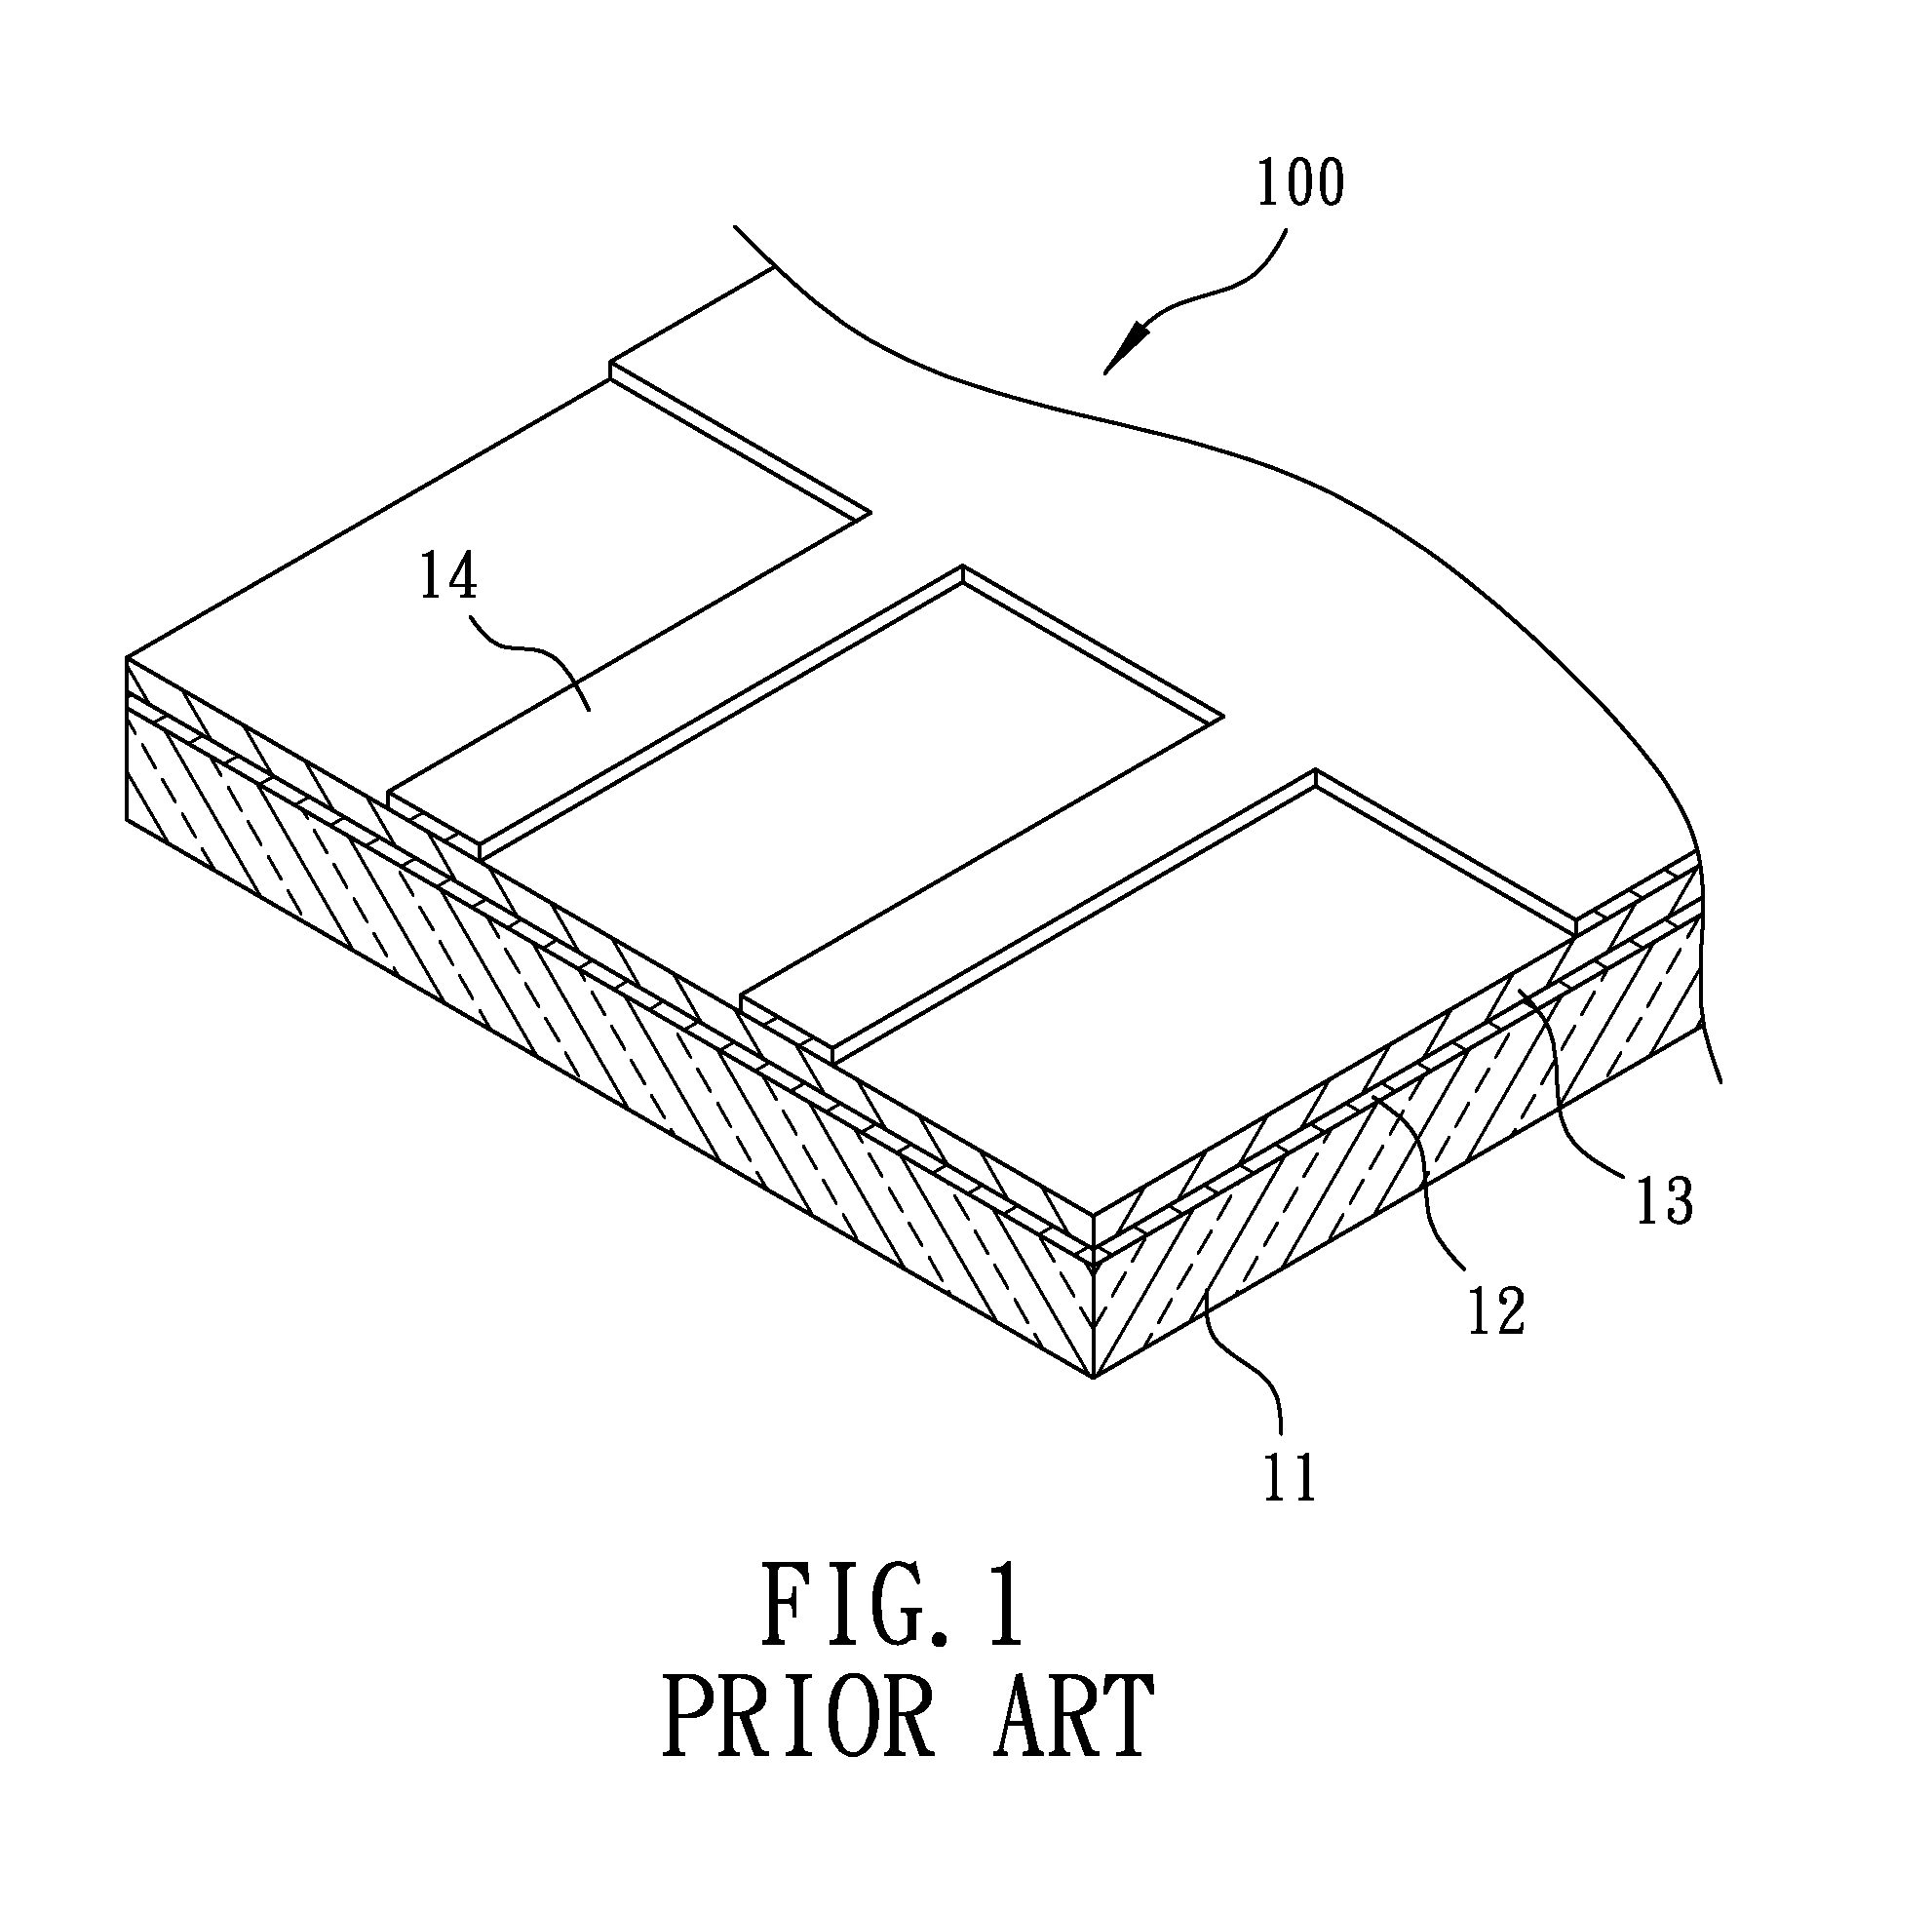 Target for a sputtering process for making a compound film layer of a thin solar cell, method of making the thin film solar cell, and thin film solar cell made thereby